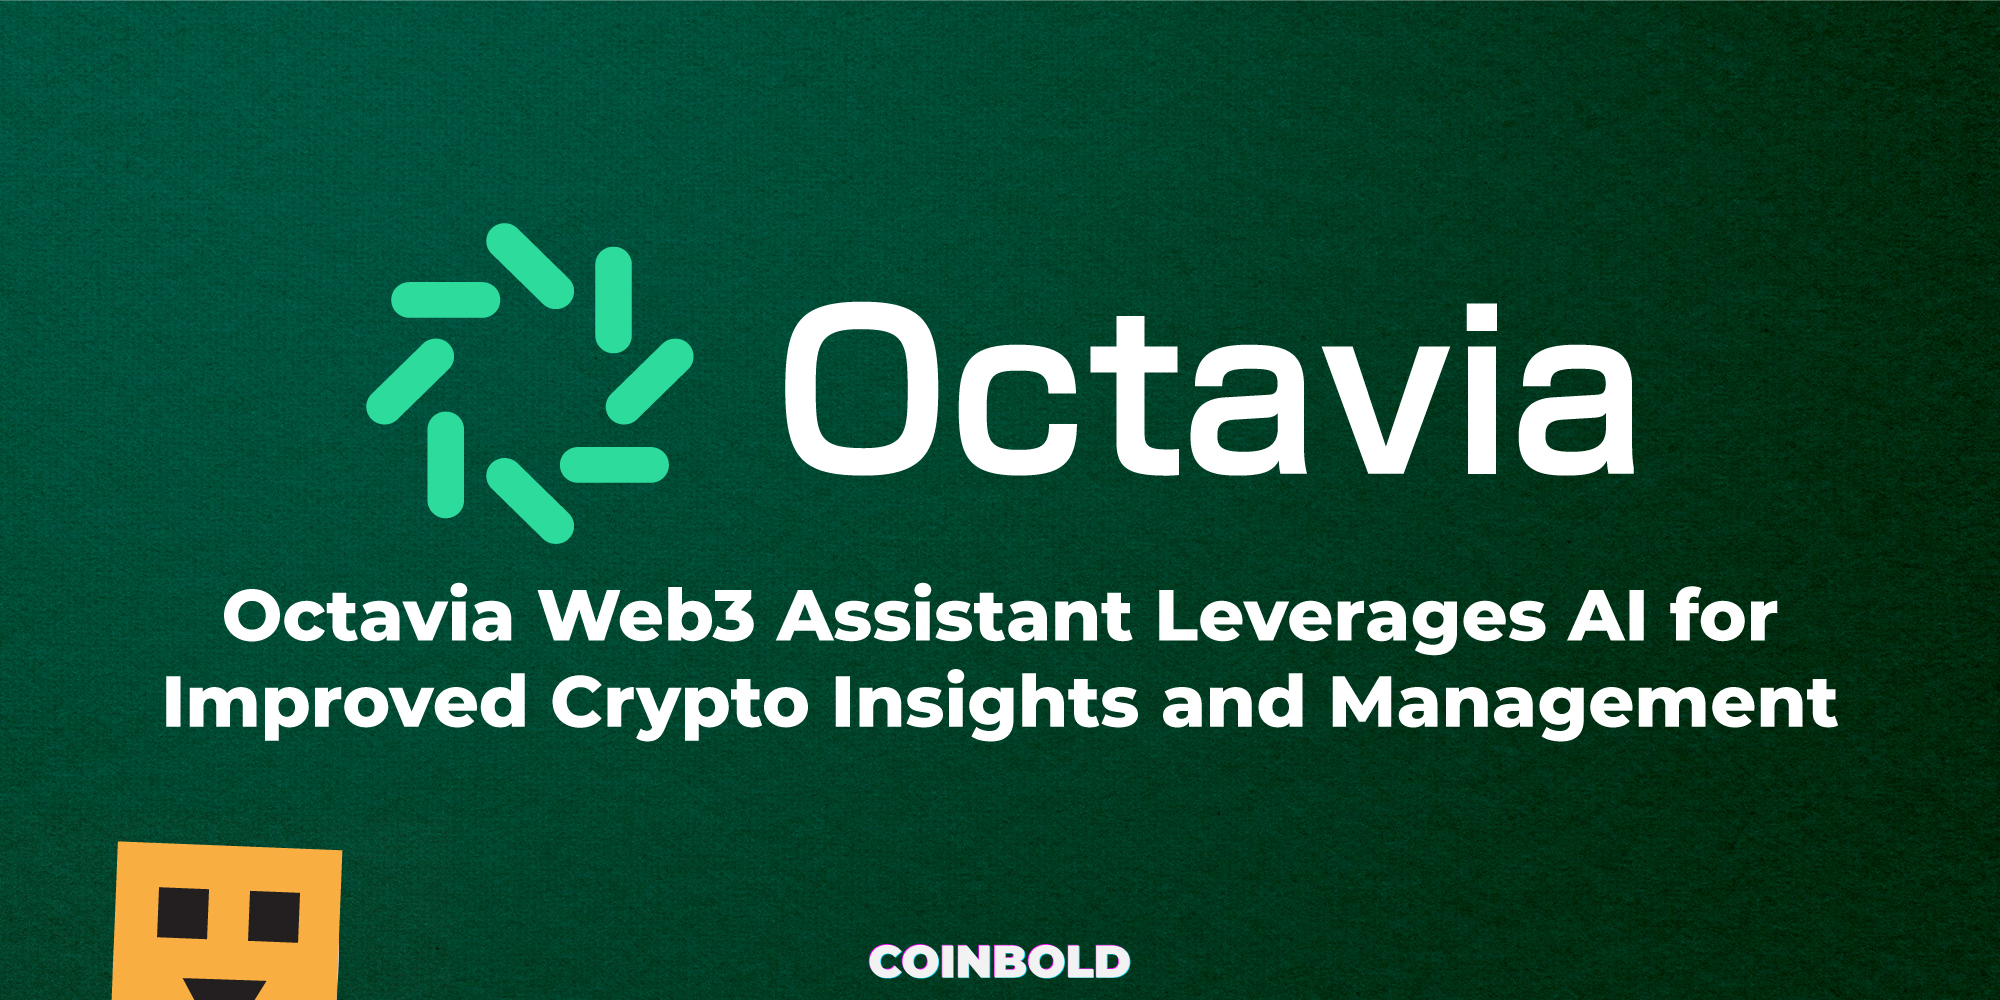 Octavia Web3 Assistant Leverages AI for Improved Crypto Insights and Management